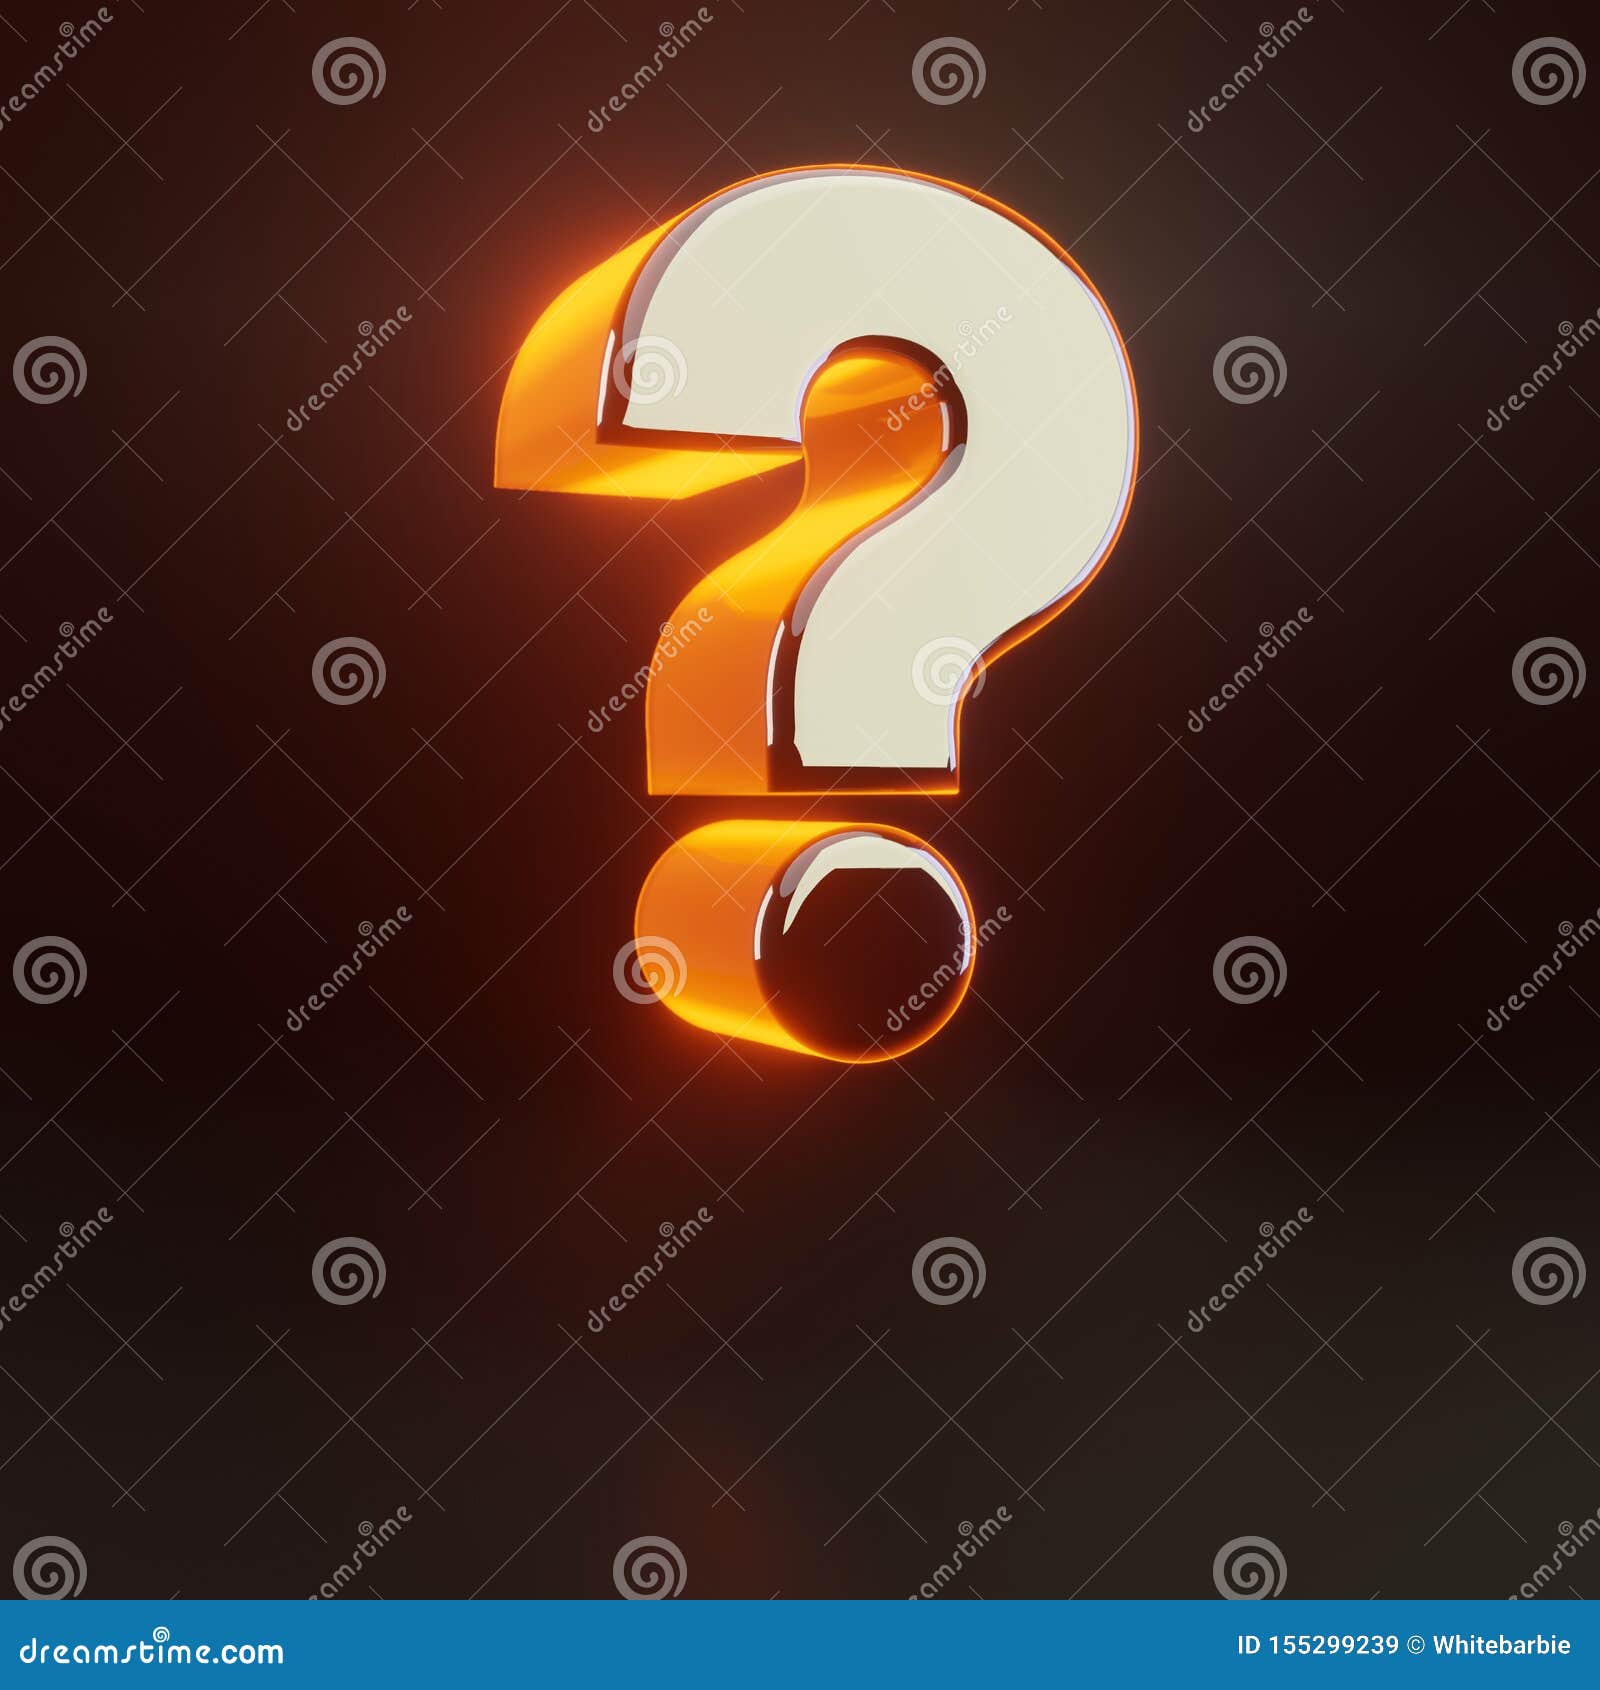 Download 3d Question Symbol. Glowing Glossy Metallic Font With ...